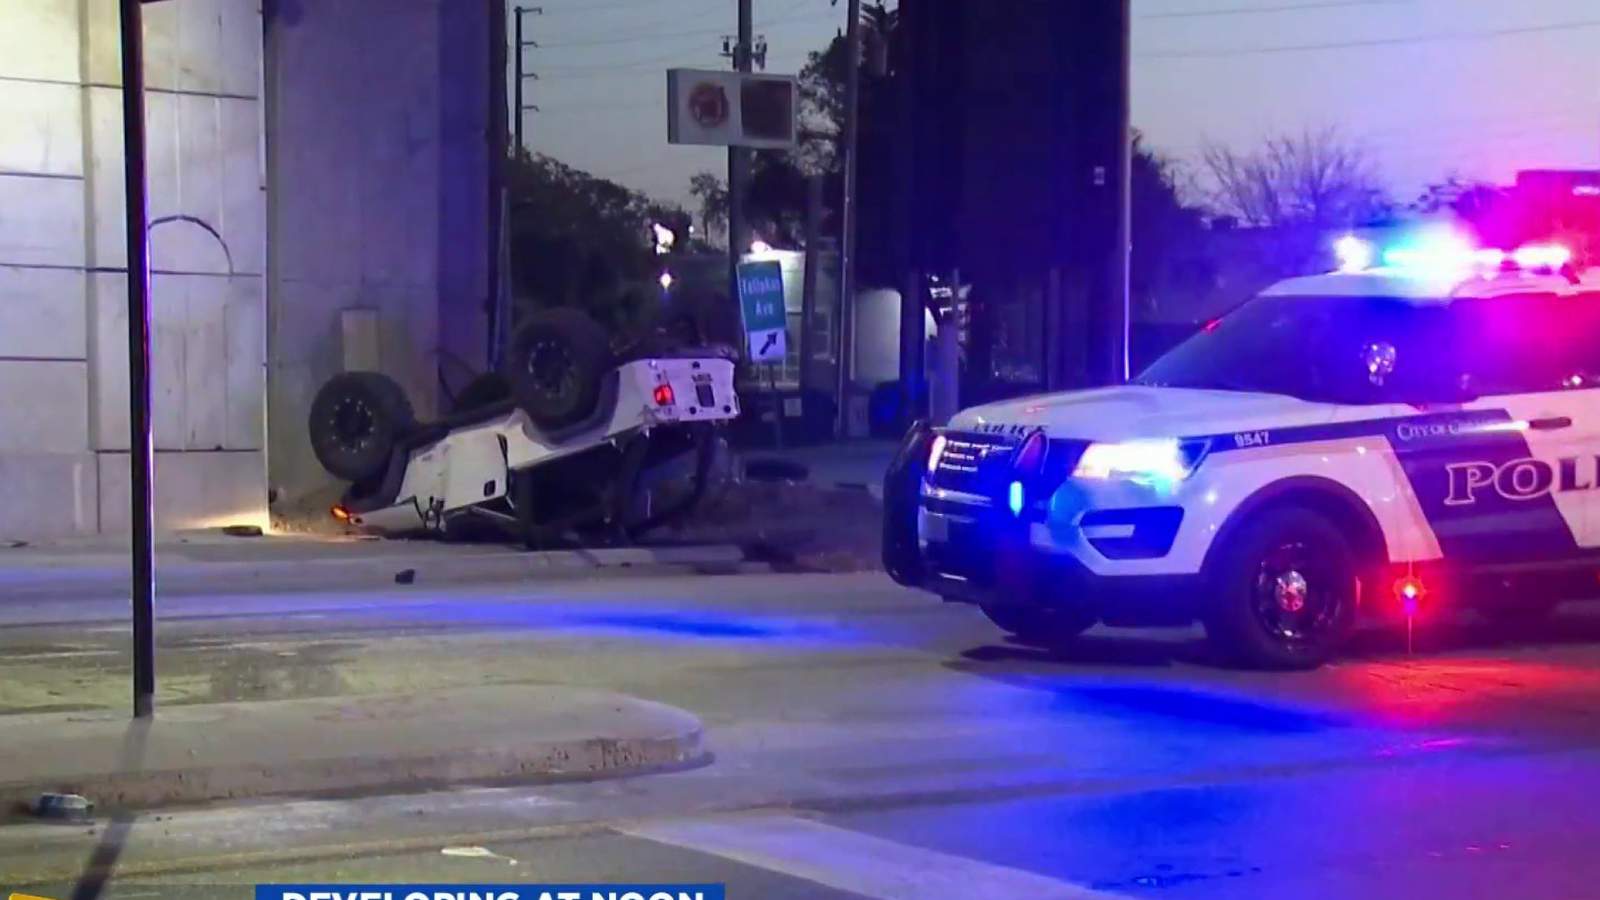 In the video, an IV-4 SUV can fall off and crash on Kaley Street near downtown Orlando.